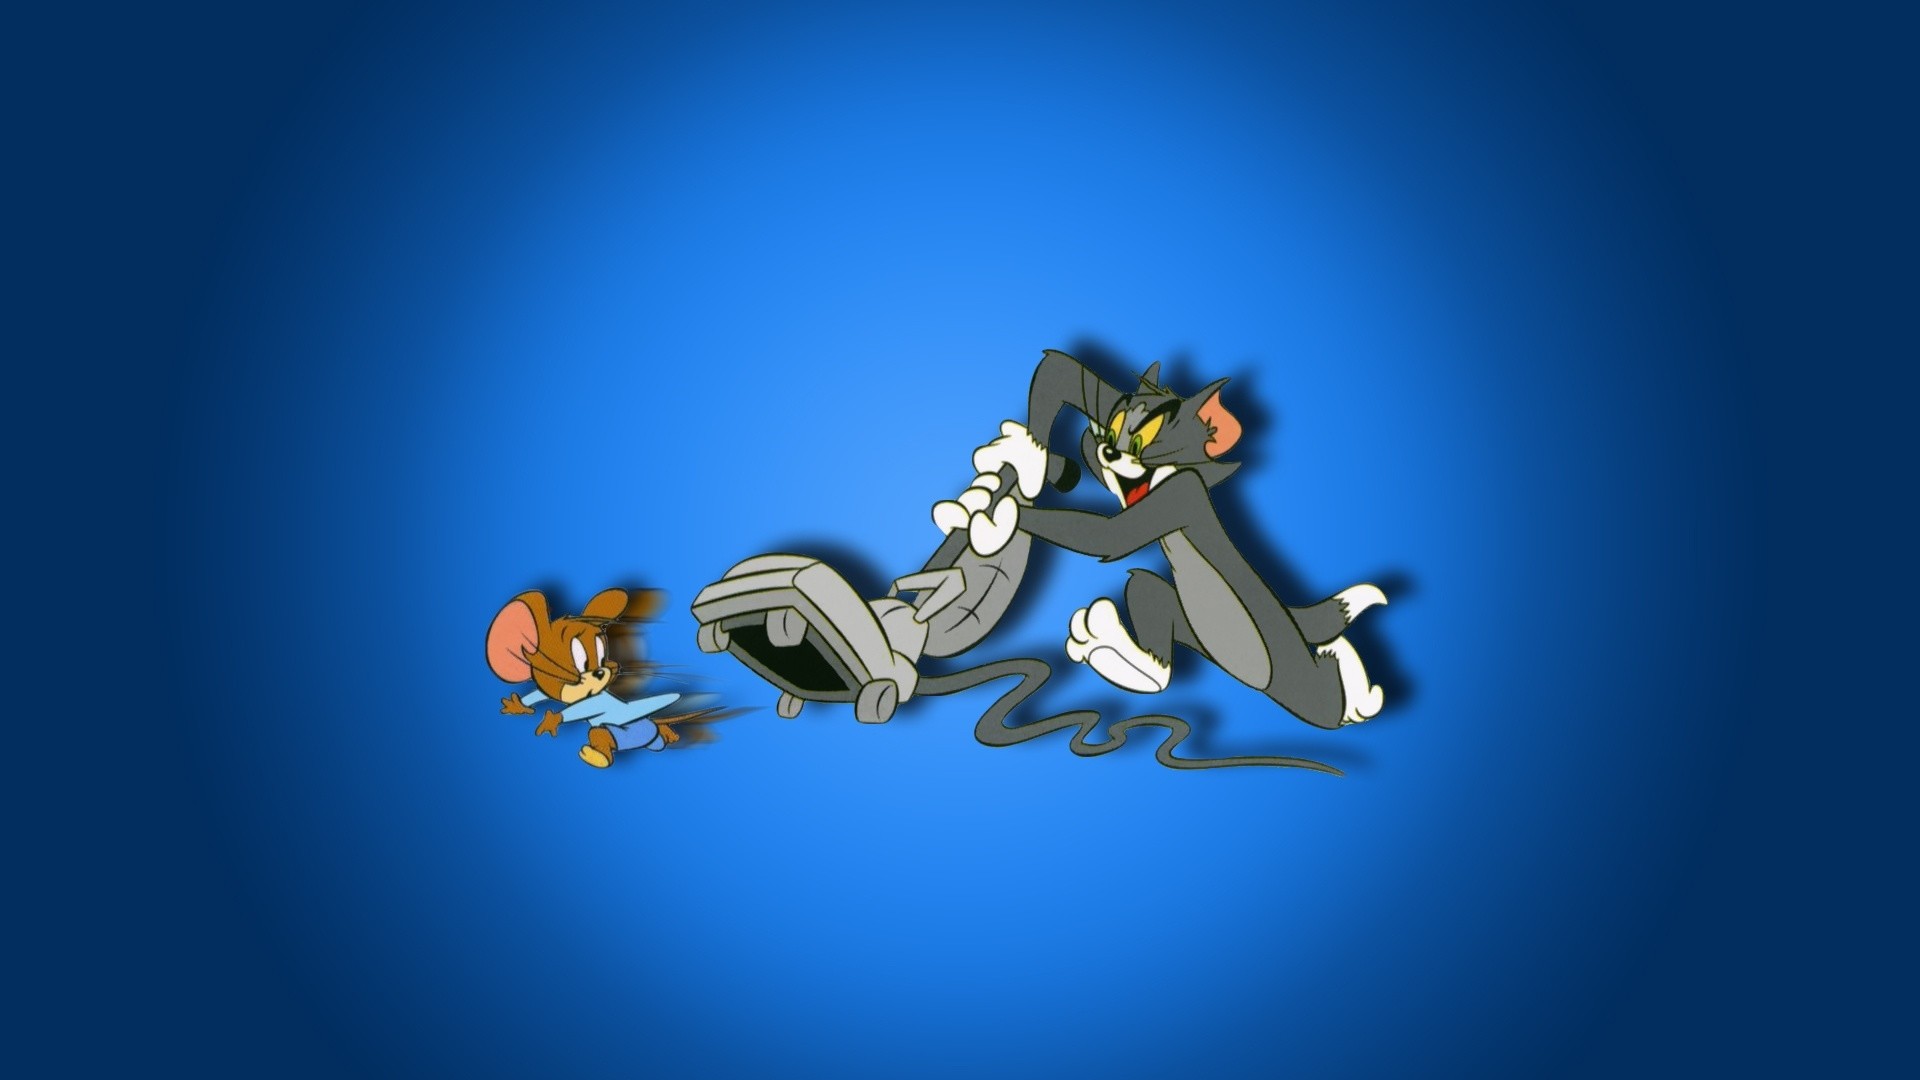 3d Live Wallpaper Animated Moving 3d Wallpaper Hd - Tom And Jerry Hd  Wallpaper For Pc - 1920x1080 Wallpaper 